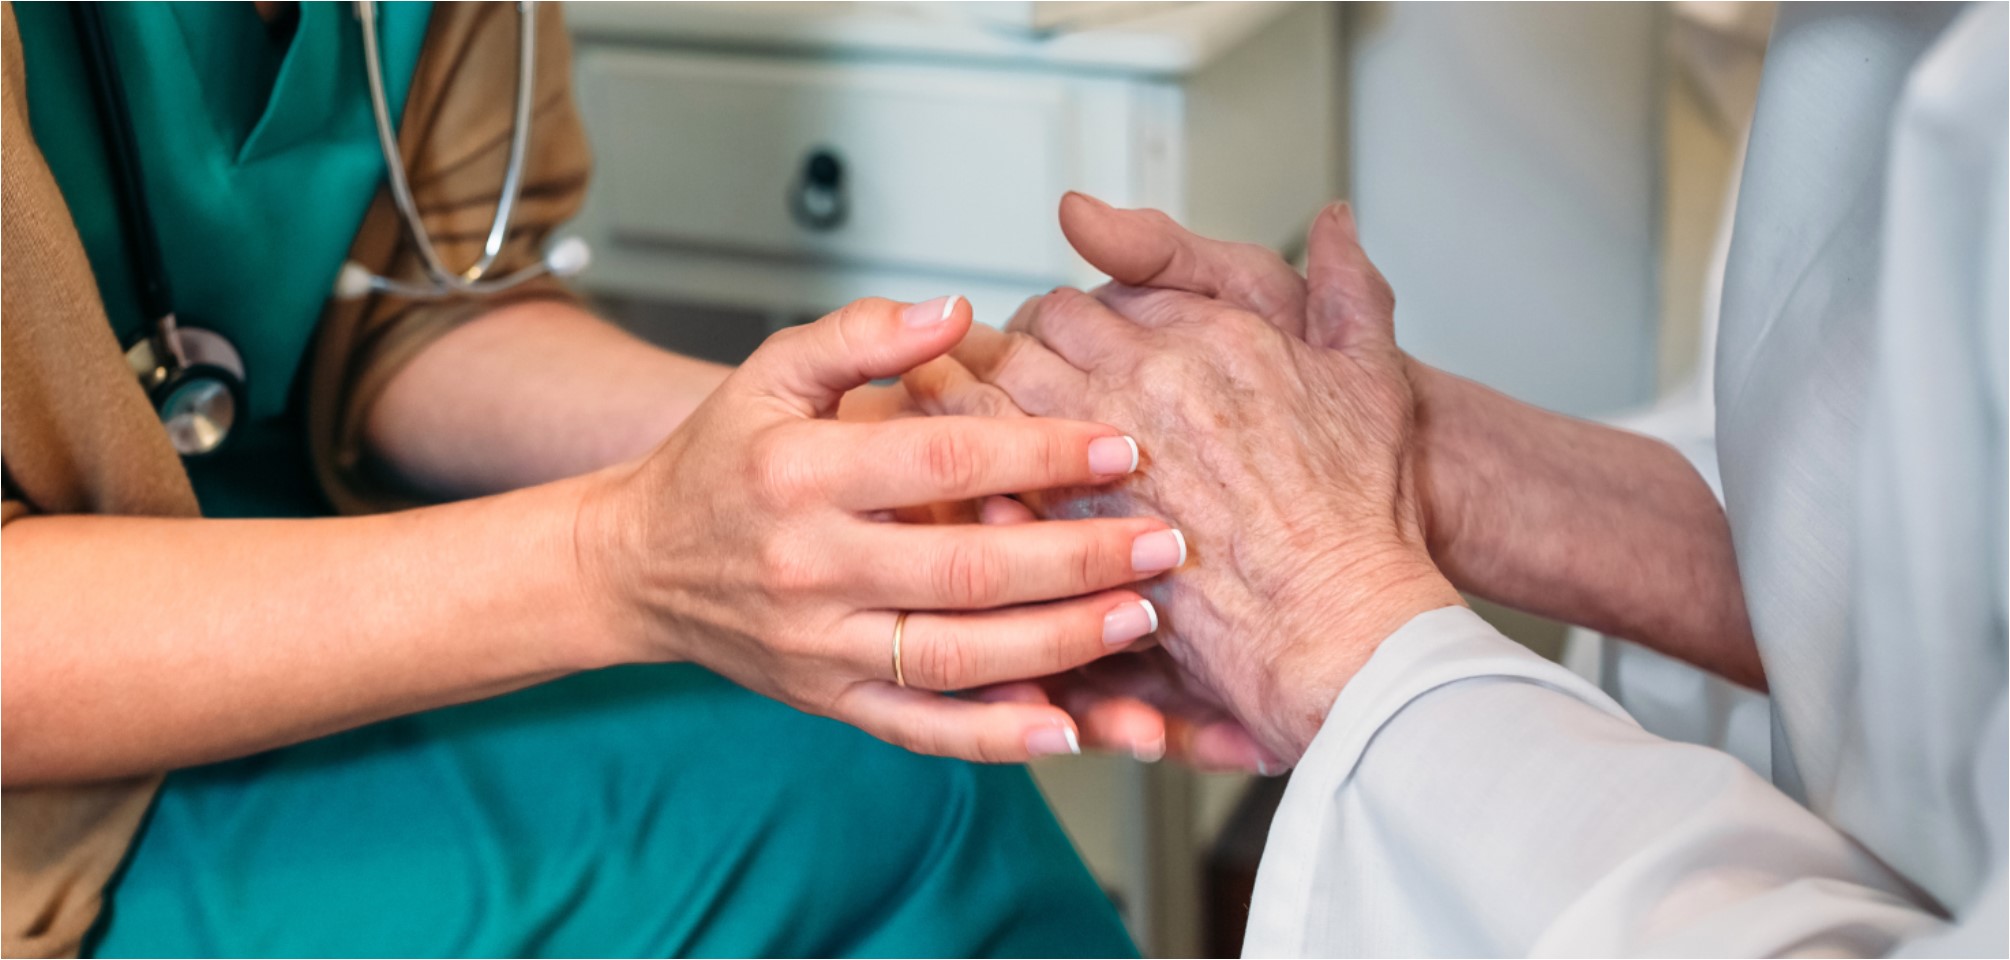 two people hold hands. one set of hands appear to be nurse's hands, and the other appear to be the patient's hands